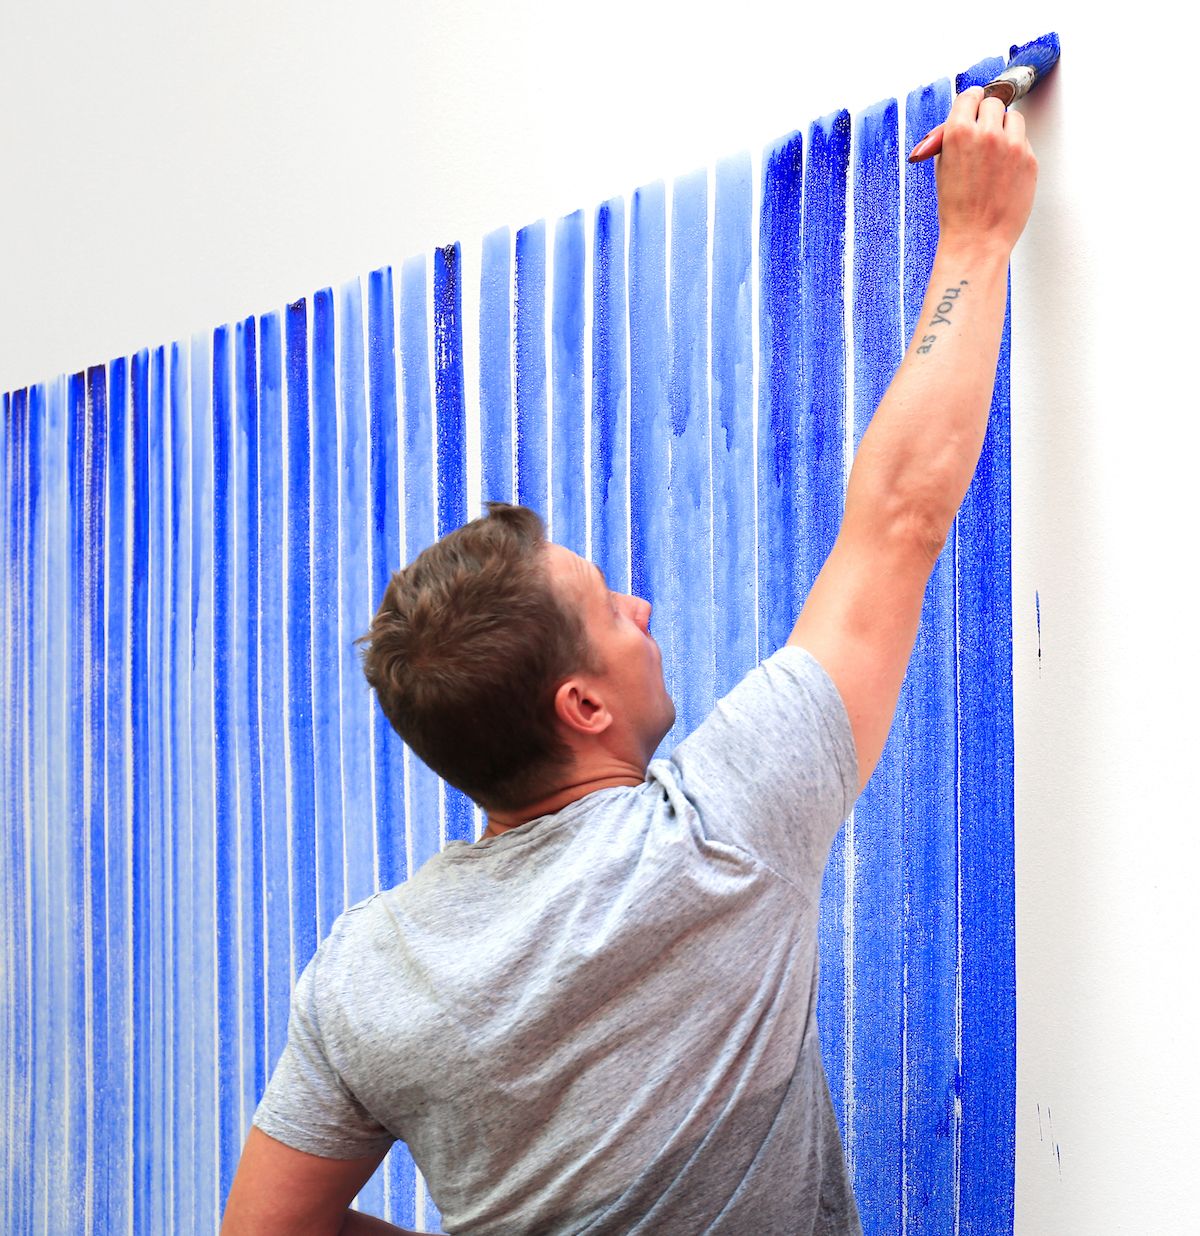 Jeppe Hein painting Breathing Watercolours on a wall Photo: Hendrik Hähner/Studio Jeppe Hein and courtesy of Jeppe Hein